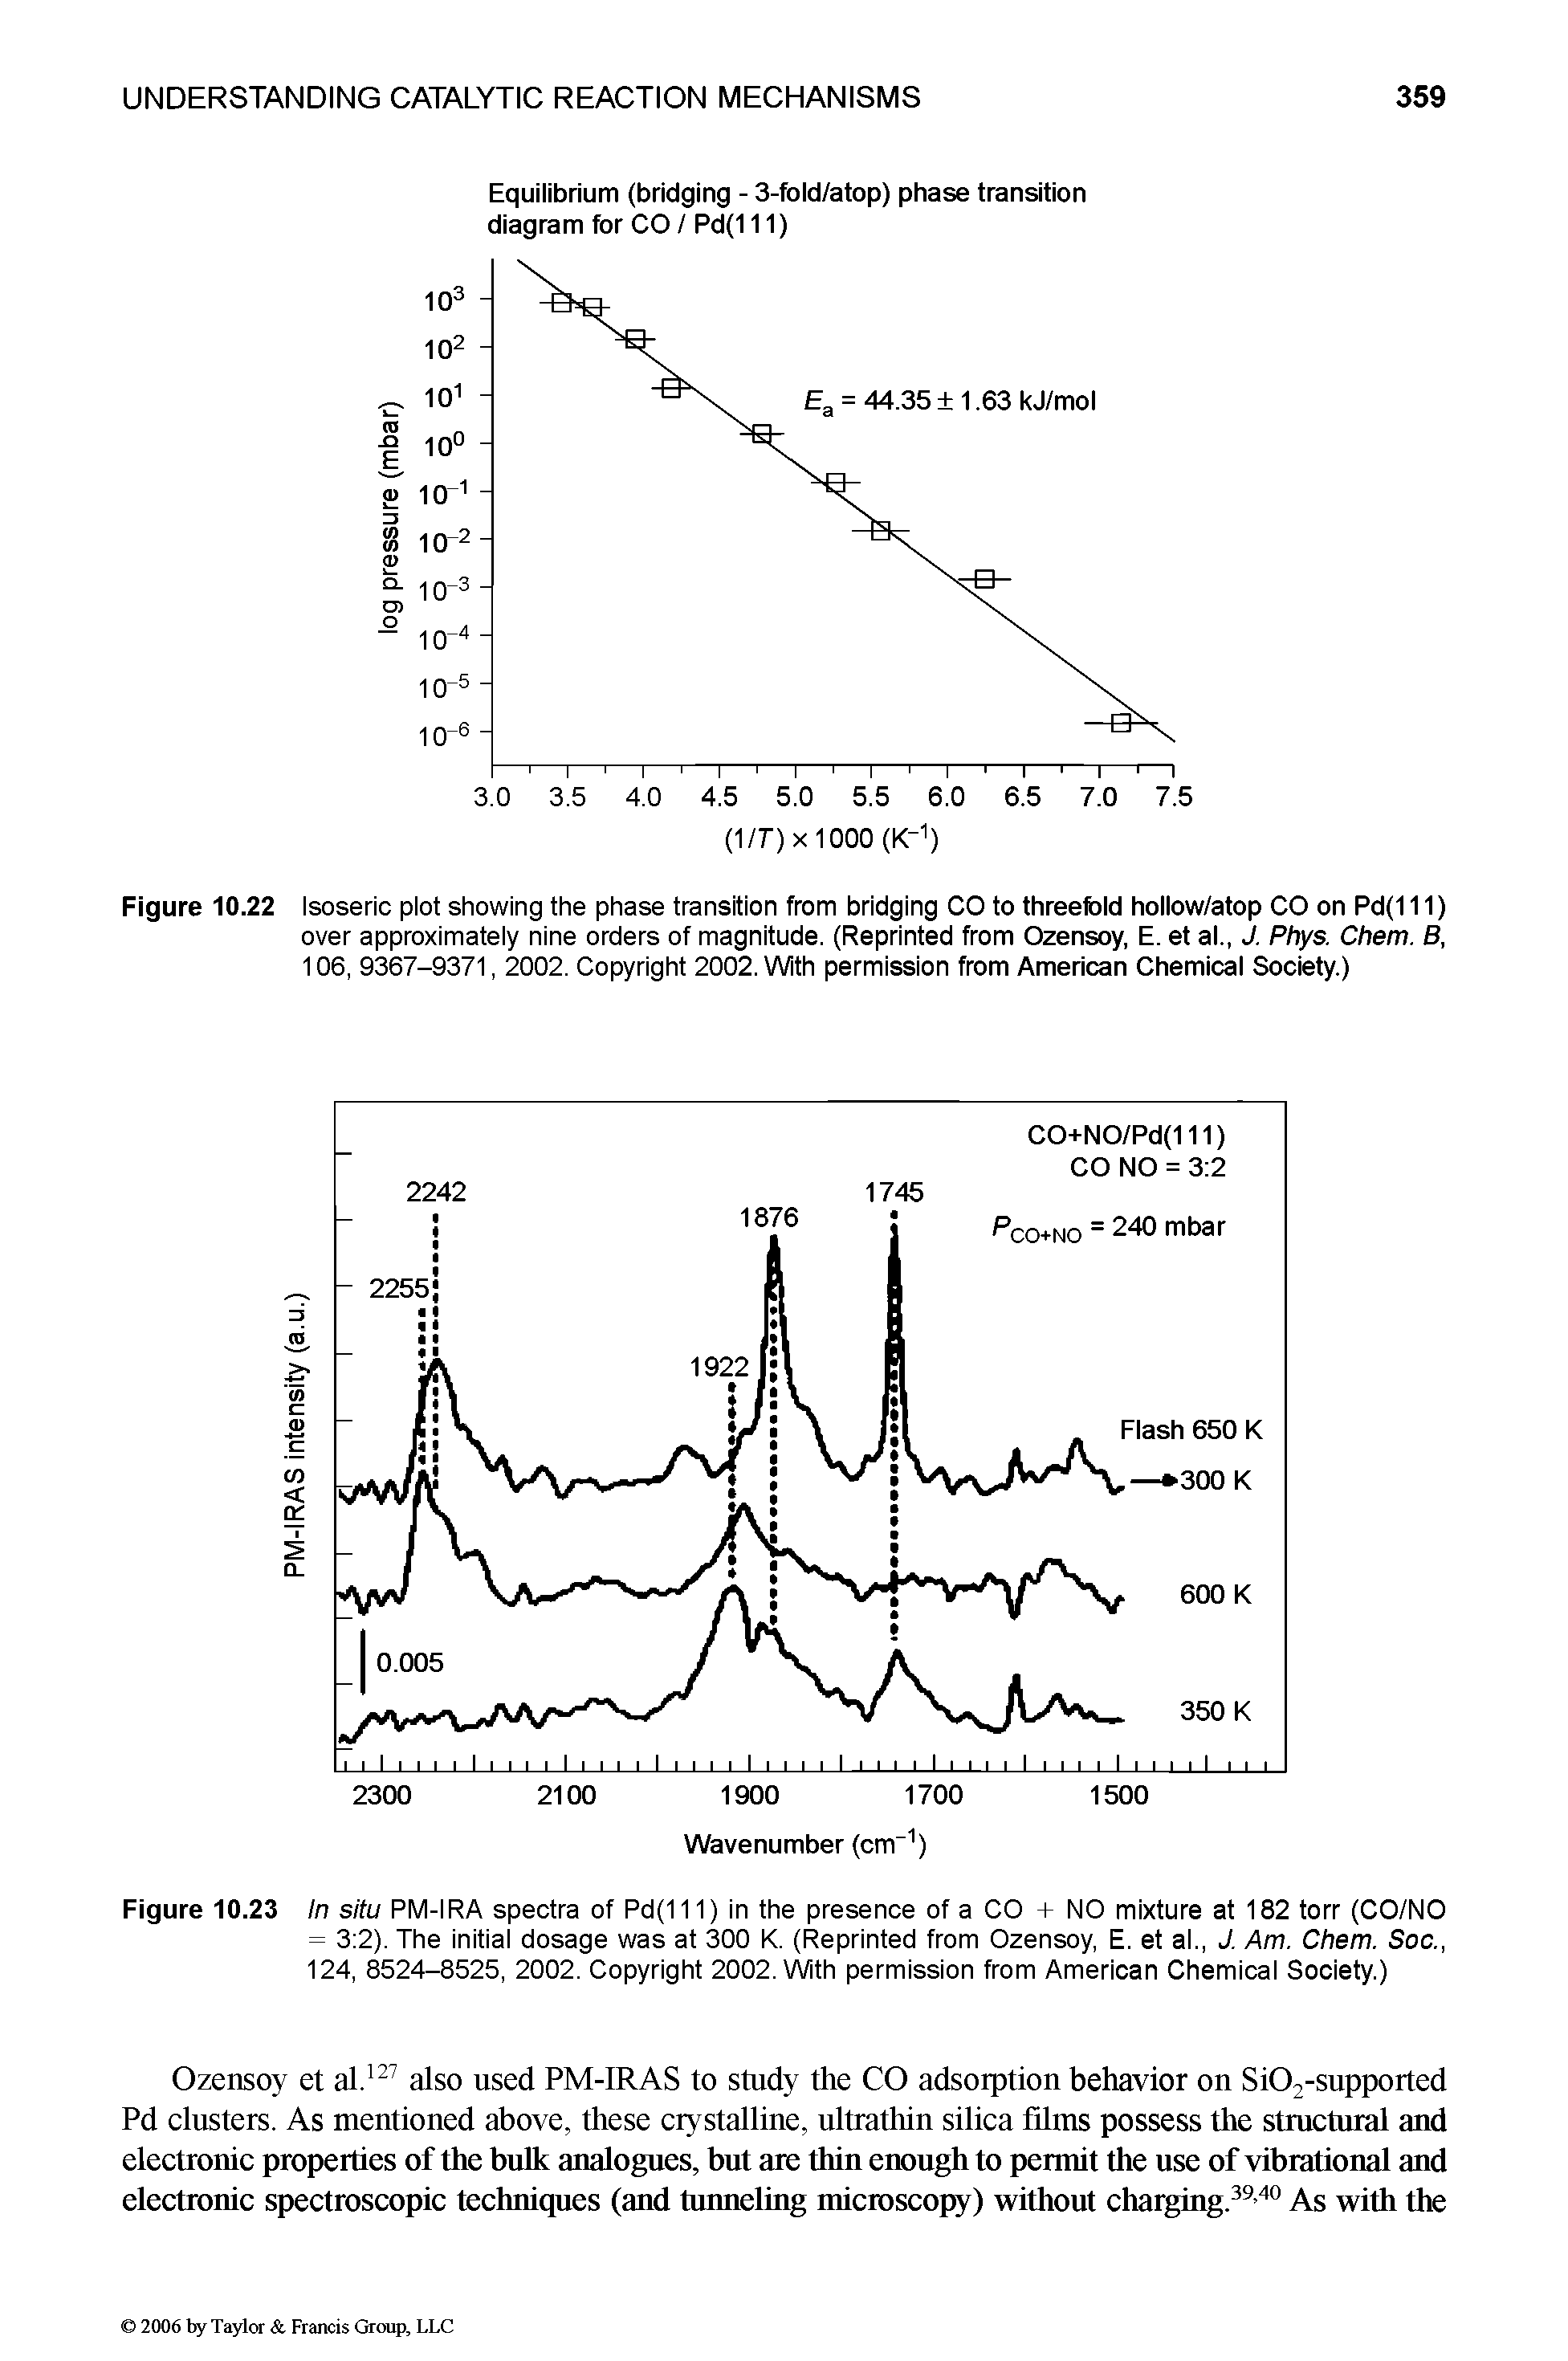 Figure 10.23 In situ PM-IRA spectra of Pd(111) in the presence of a CO + NO mixture at 182 torr (CO/NO = 3 2). The initial dosage was at 300 K. (Reprinted from Ozensoy, E. et al., J. Am. Chem. Soc., 124, 8524-8525, 2002. Copyright 2002. With permission from American Chemical Society.)...